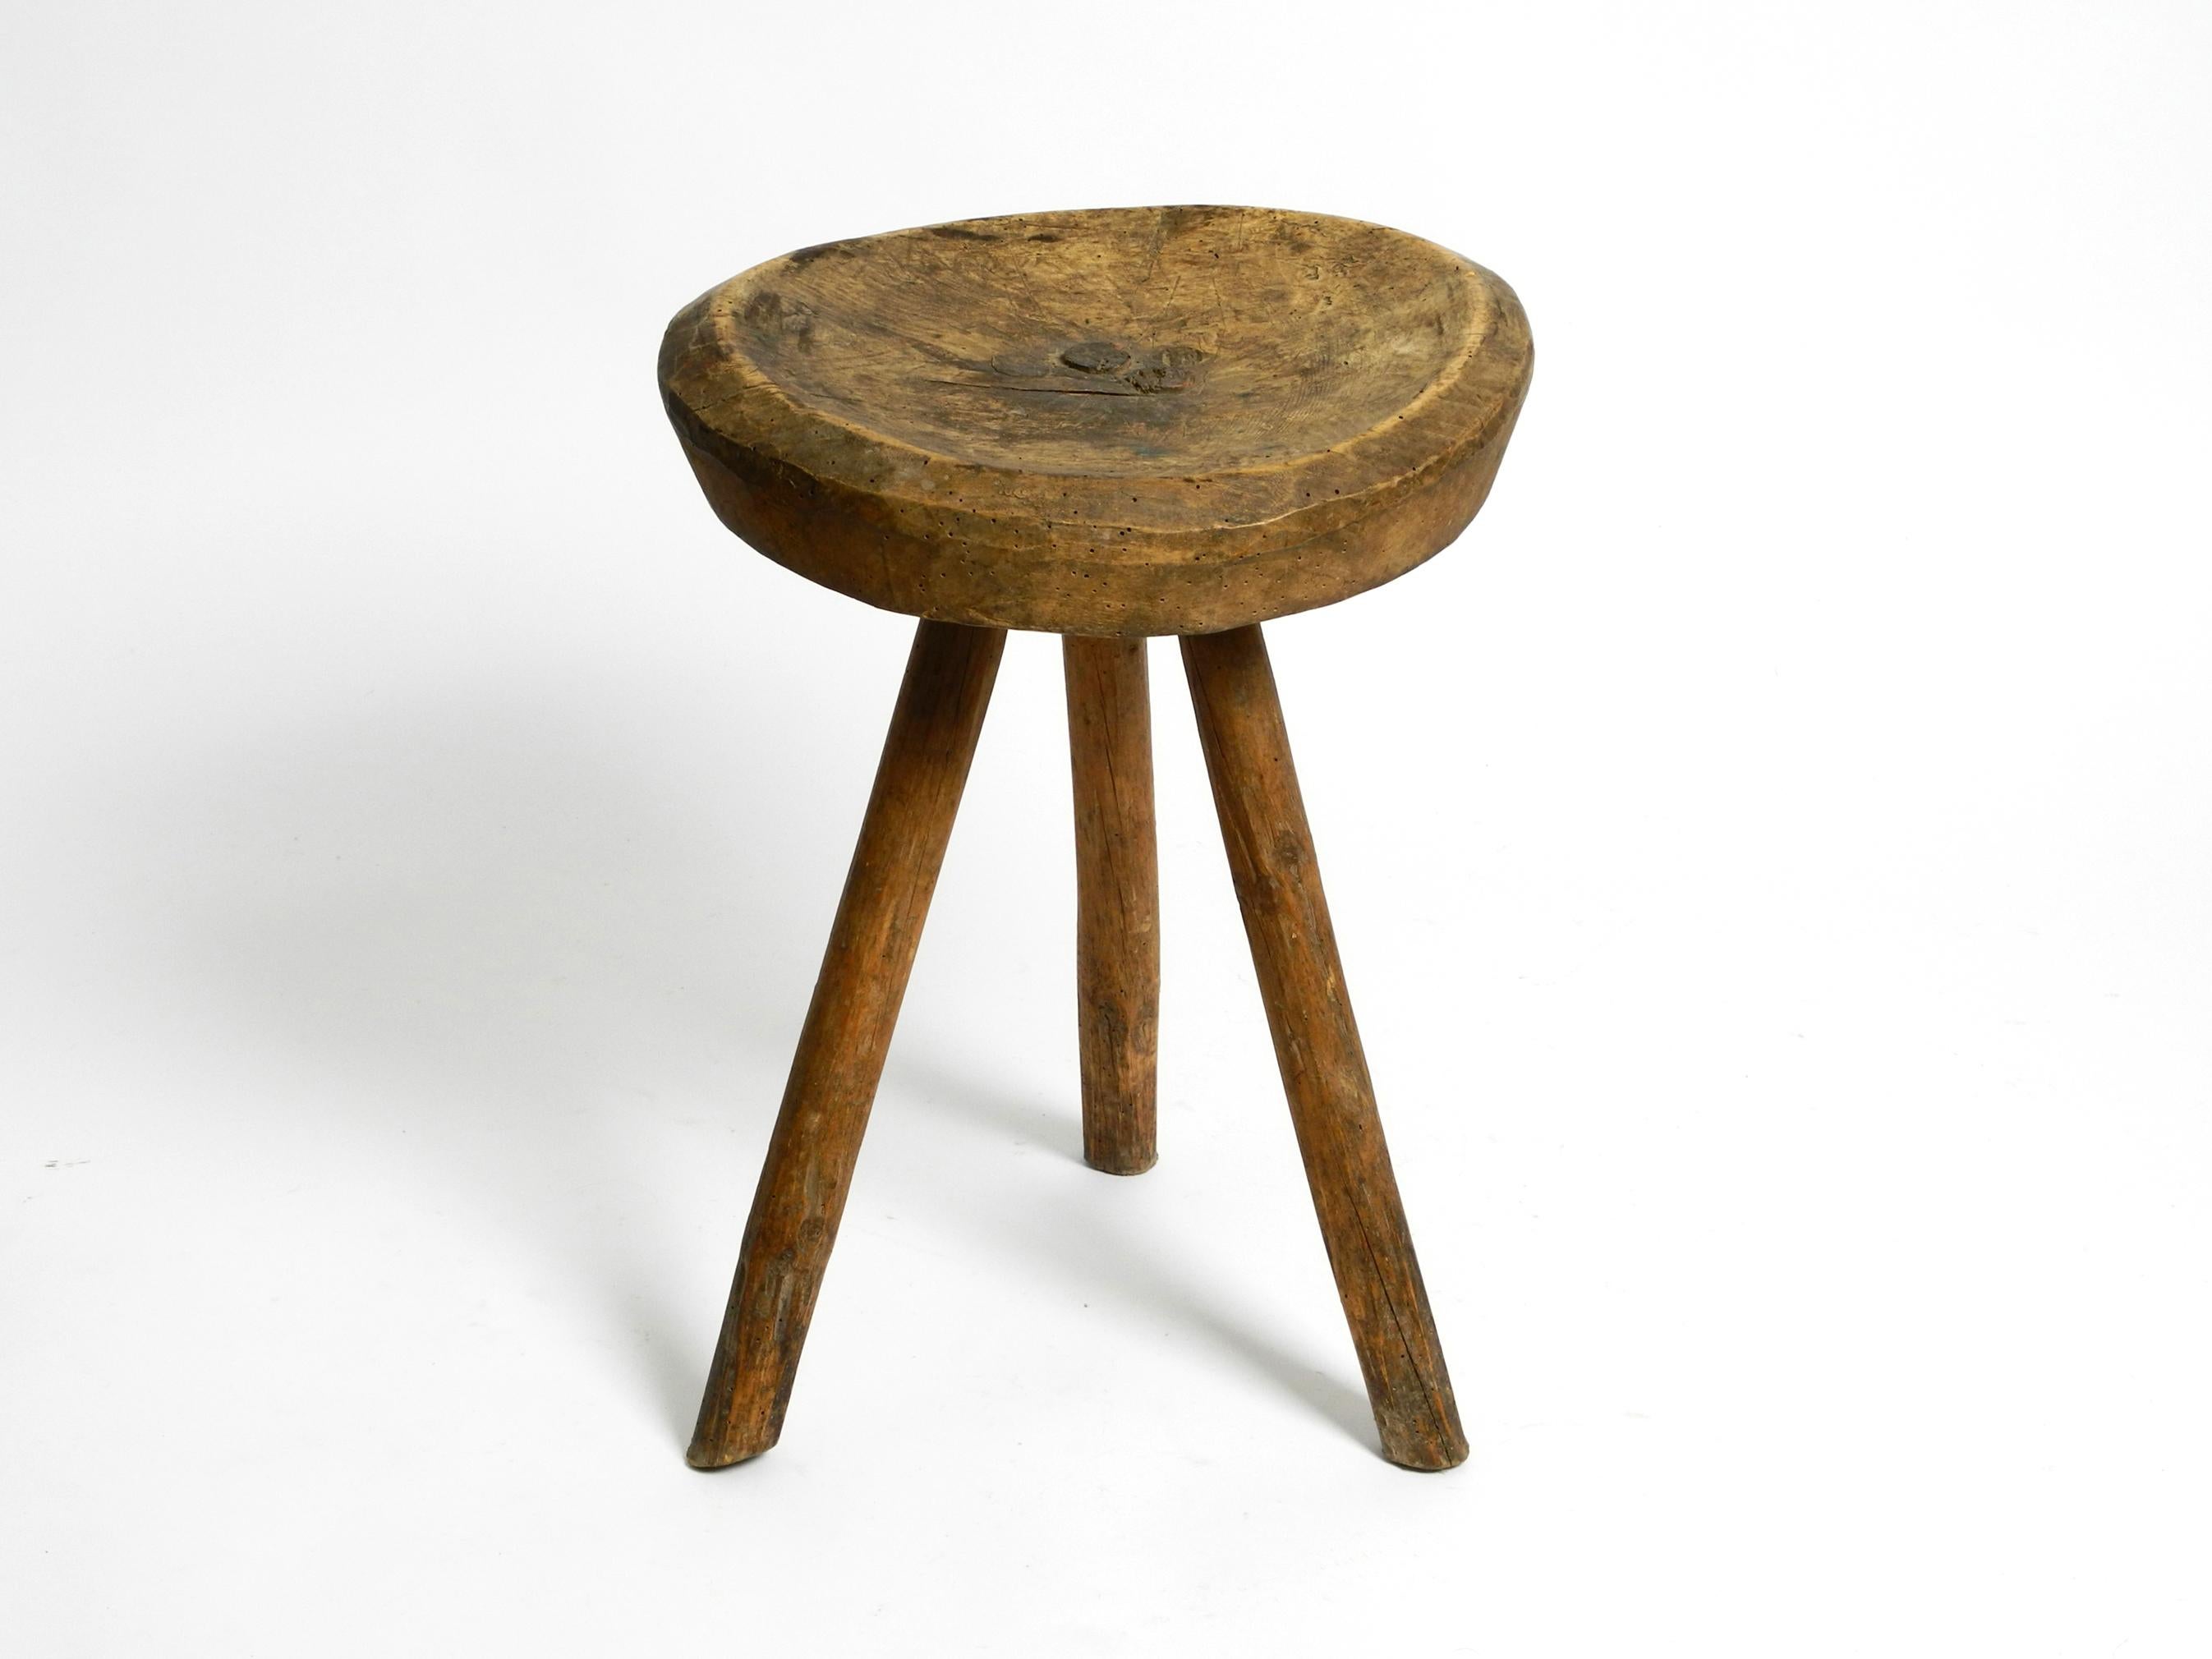 Beautiful original hand-carved three-legged stool made of solid wood.
Made in Germany around 1900. Beautiful patina.
I acquired the stool from the descendants of the previous owners.
Very robust and heavily built, can also be used as a small side